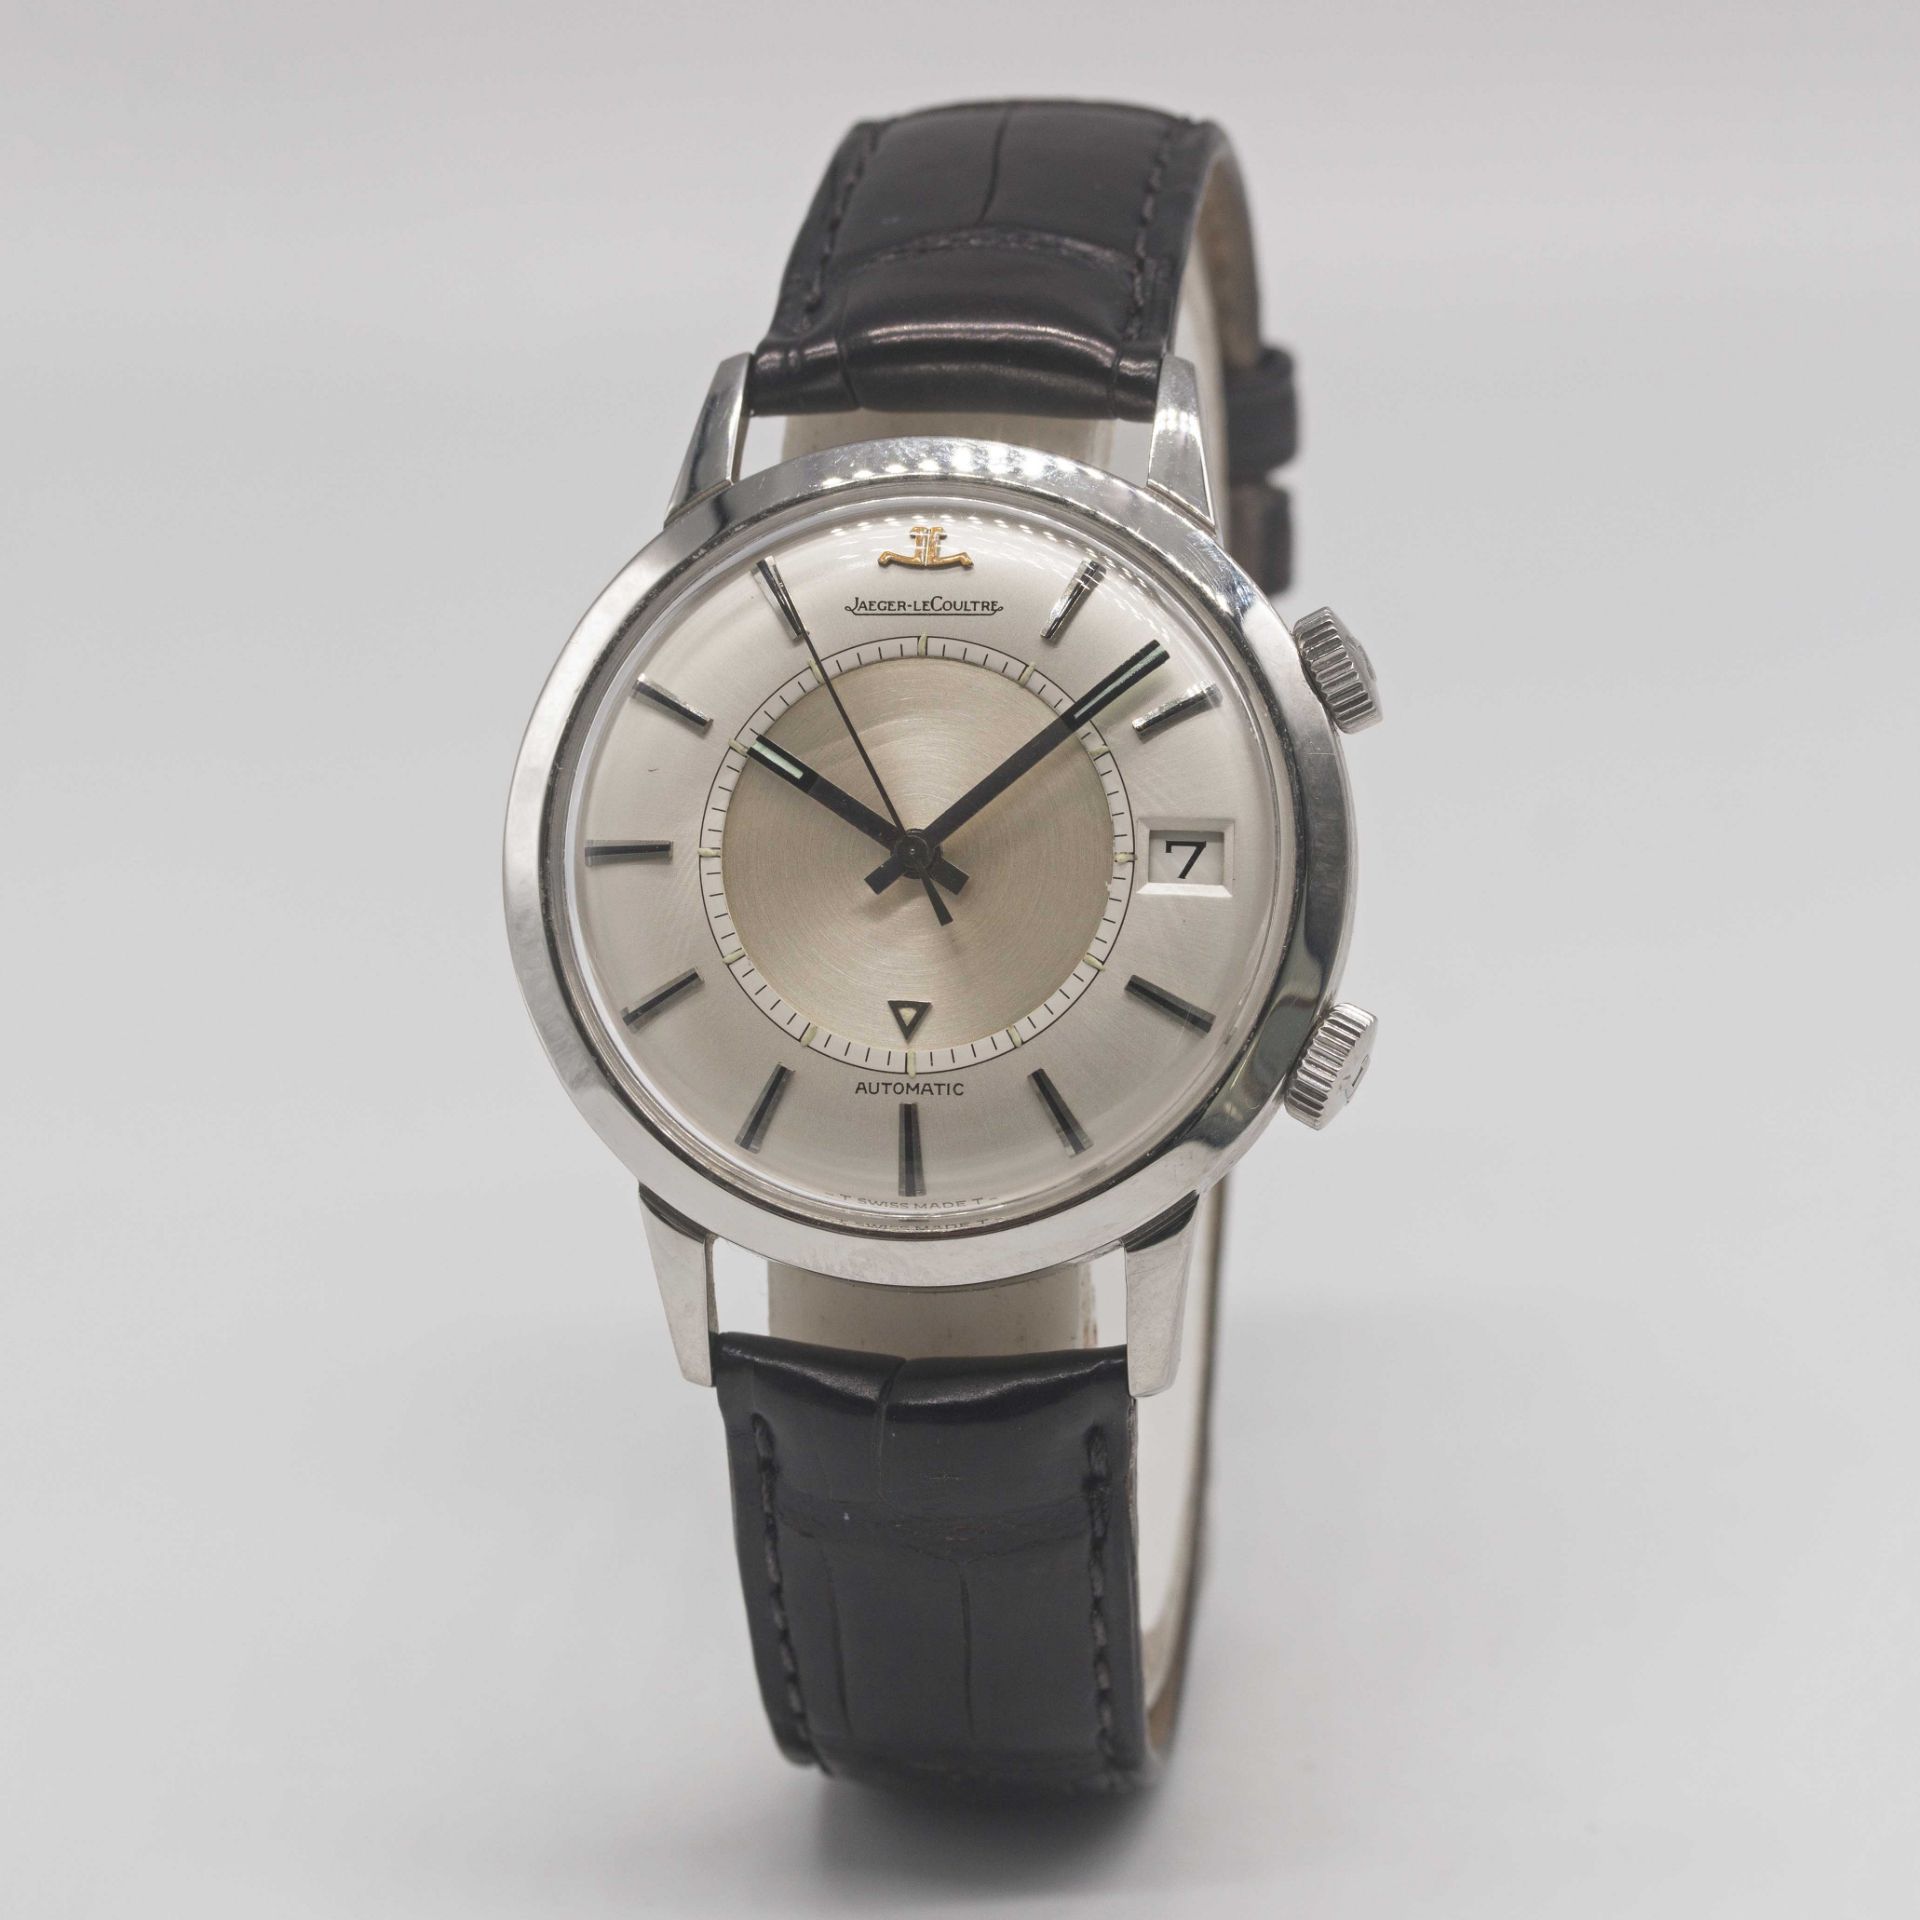 A GENTLEMAN'S STAINLESS STEEL JAEGER LECOULTRE MEMOVOX AUTOMATIC ALARM WRIST WATCH CIRCA 1960s, REF. - Image 4 of 9